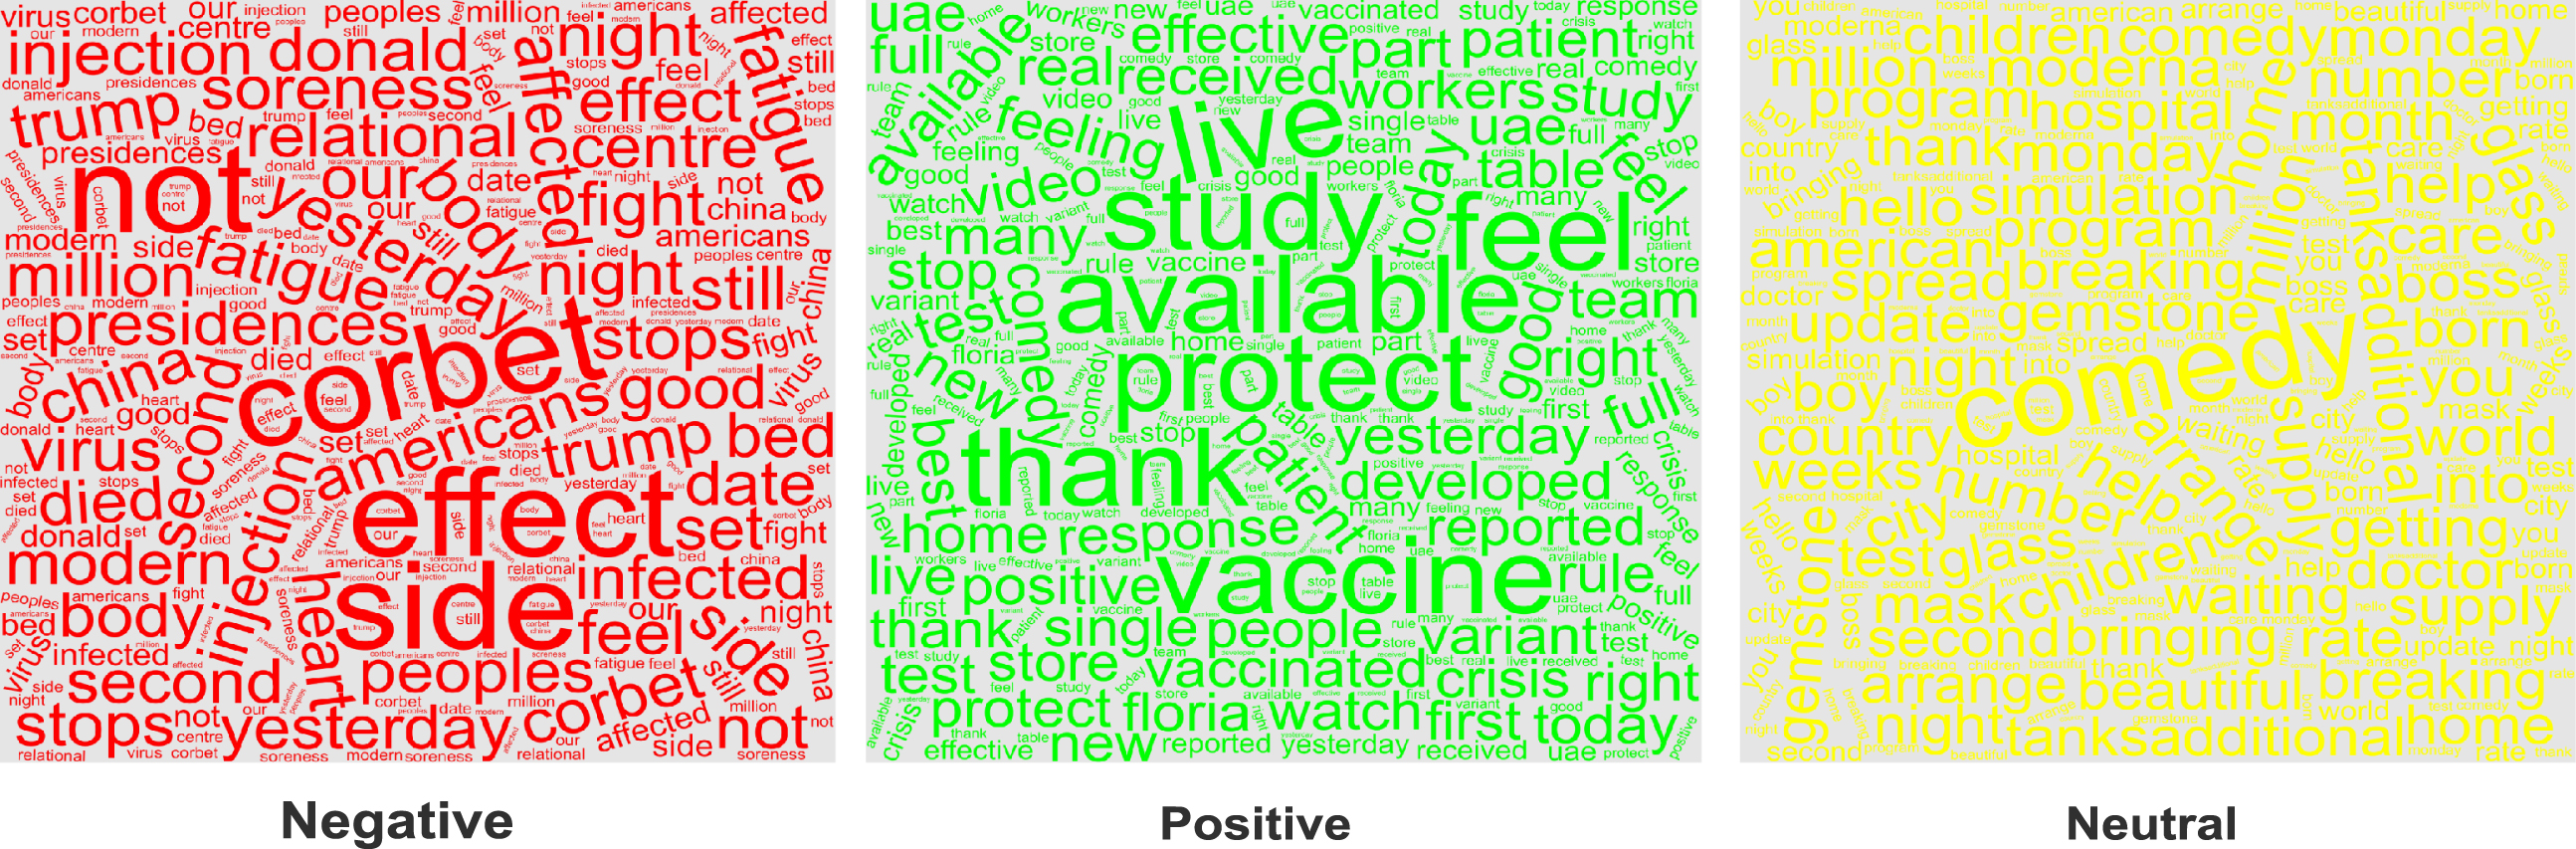 Negative, positive, and neutral sentiment about Moderna COVID-19 vaccine.